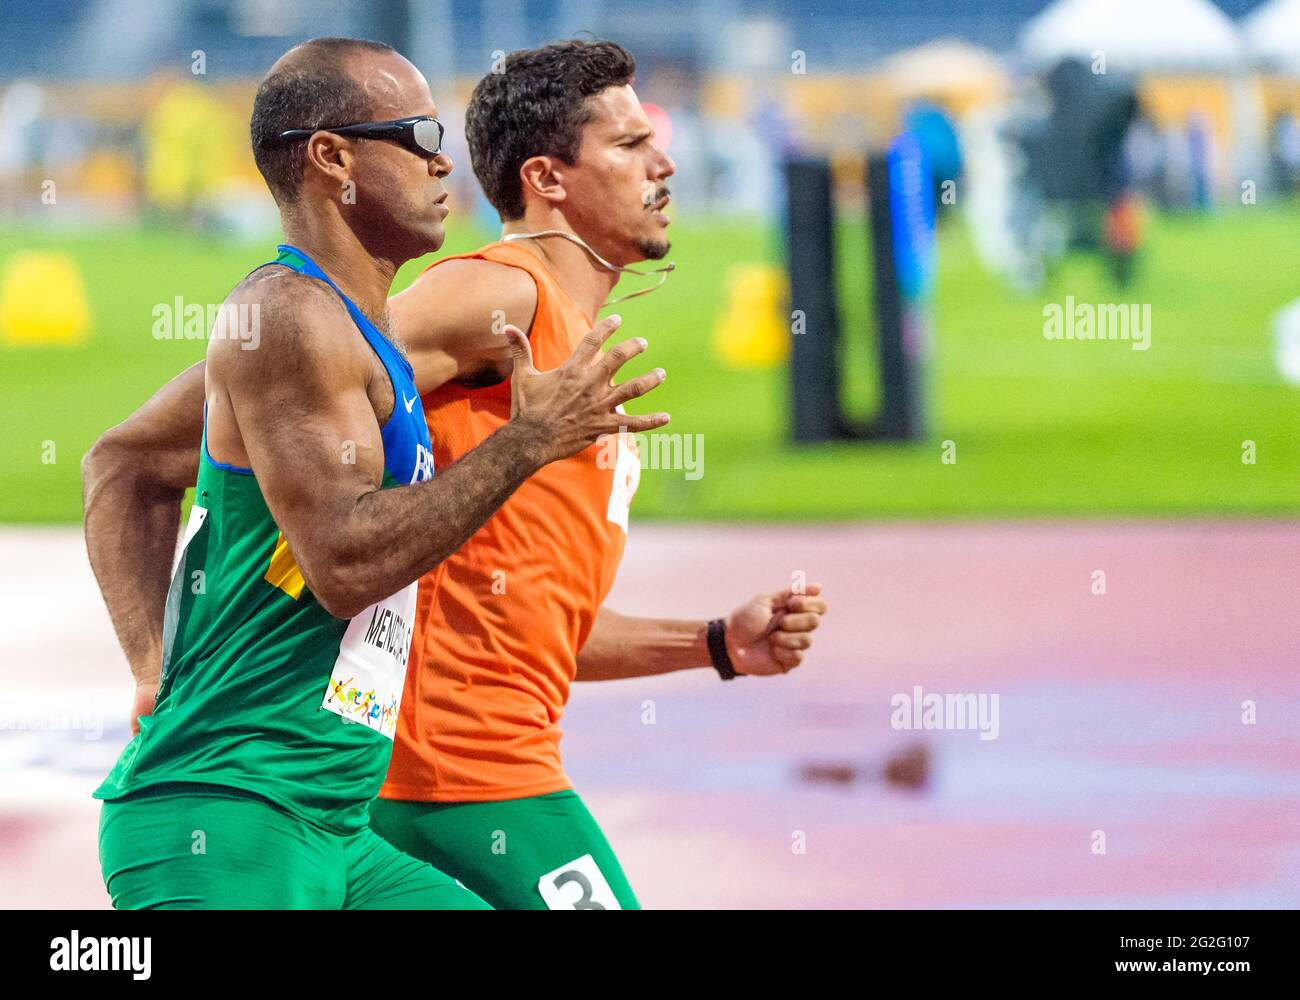 Visually challenged Brazillian athlete running the race with the help of his guide at the 2015 Parapan American Games. The 2015 Parapan American Games Stock Photo